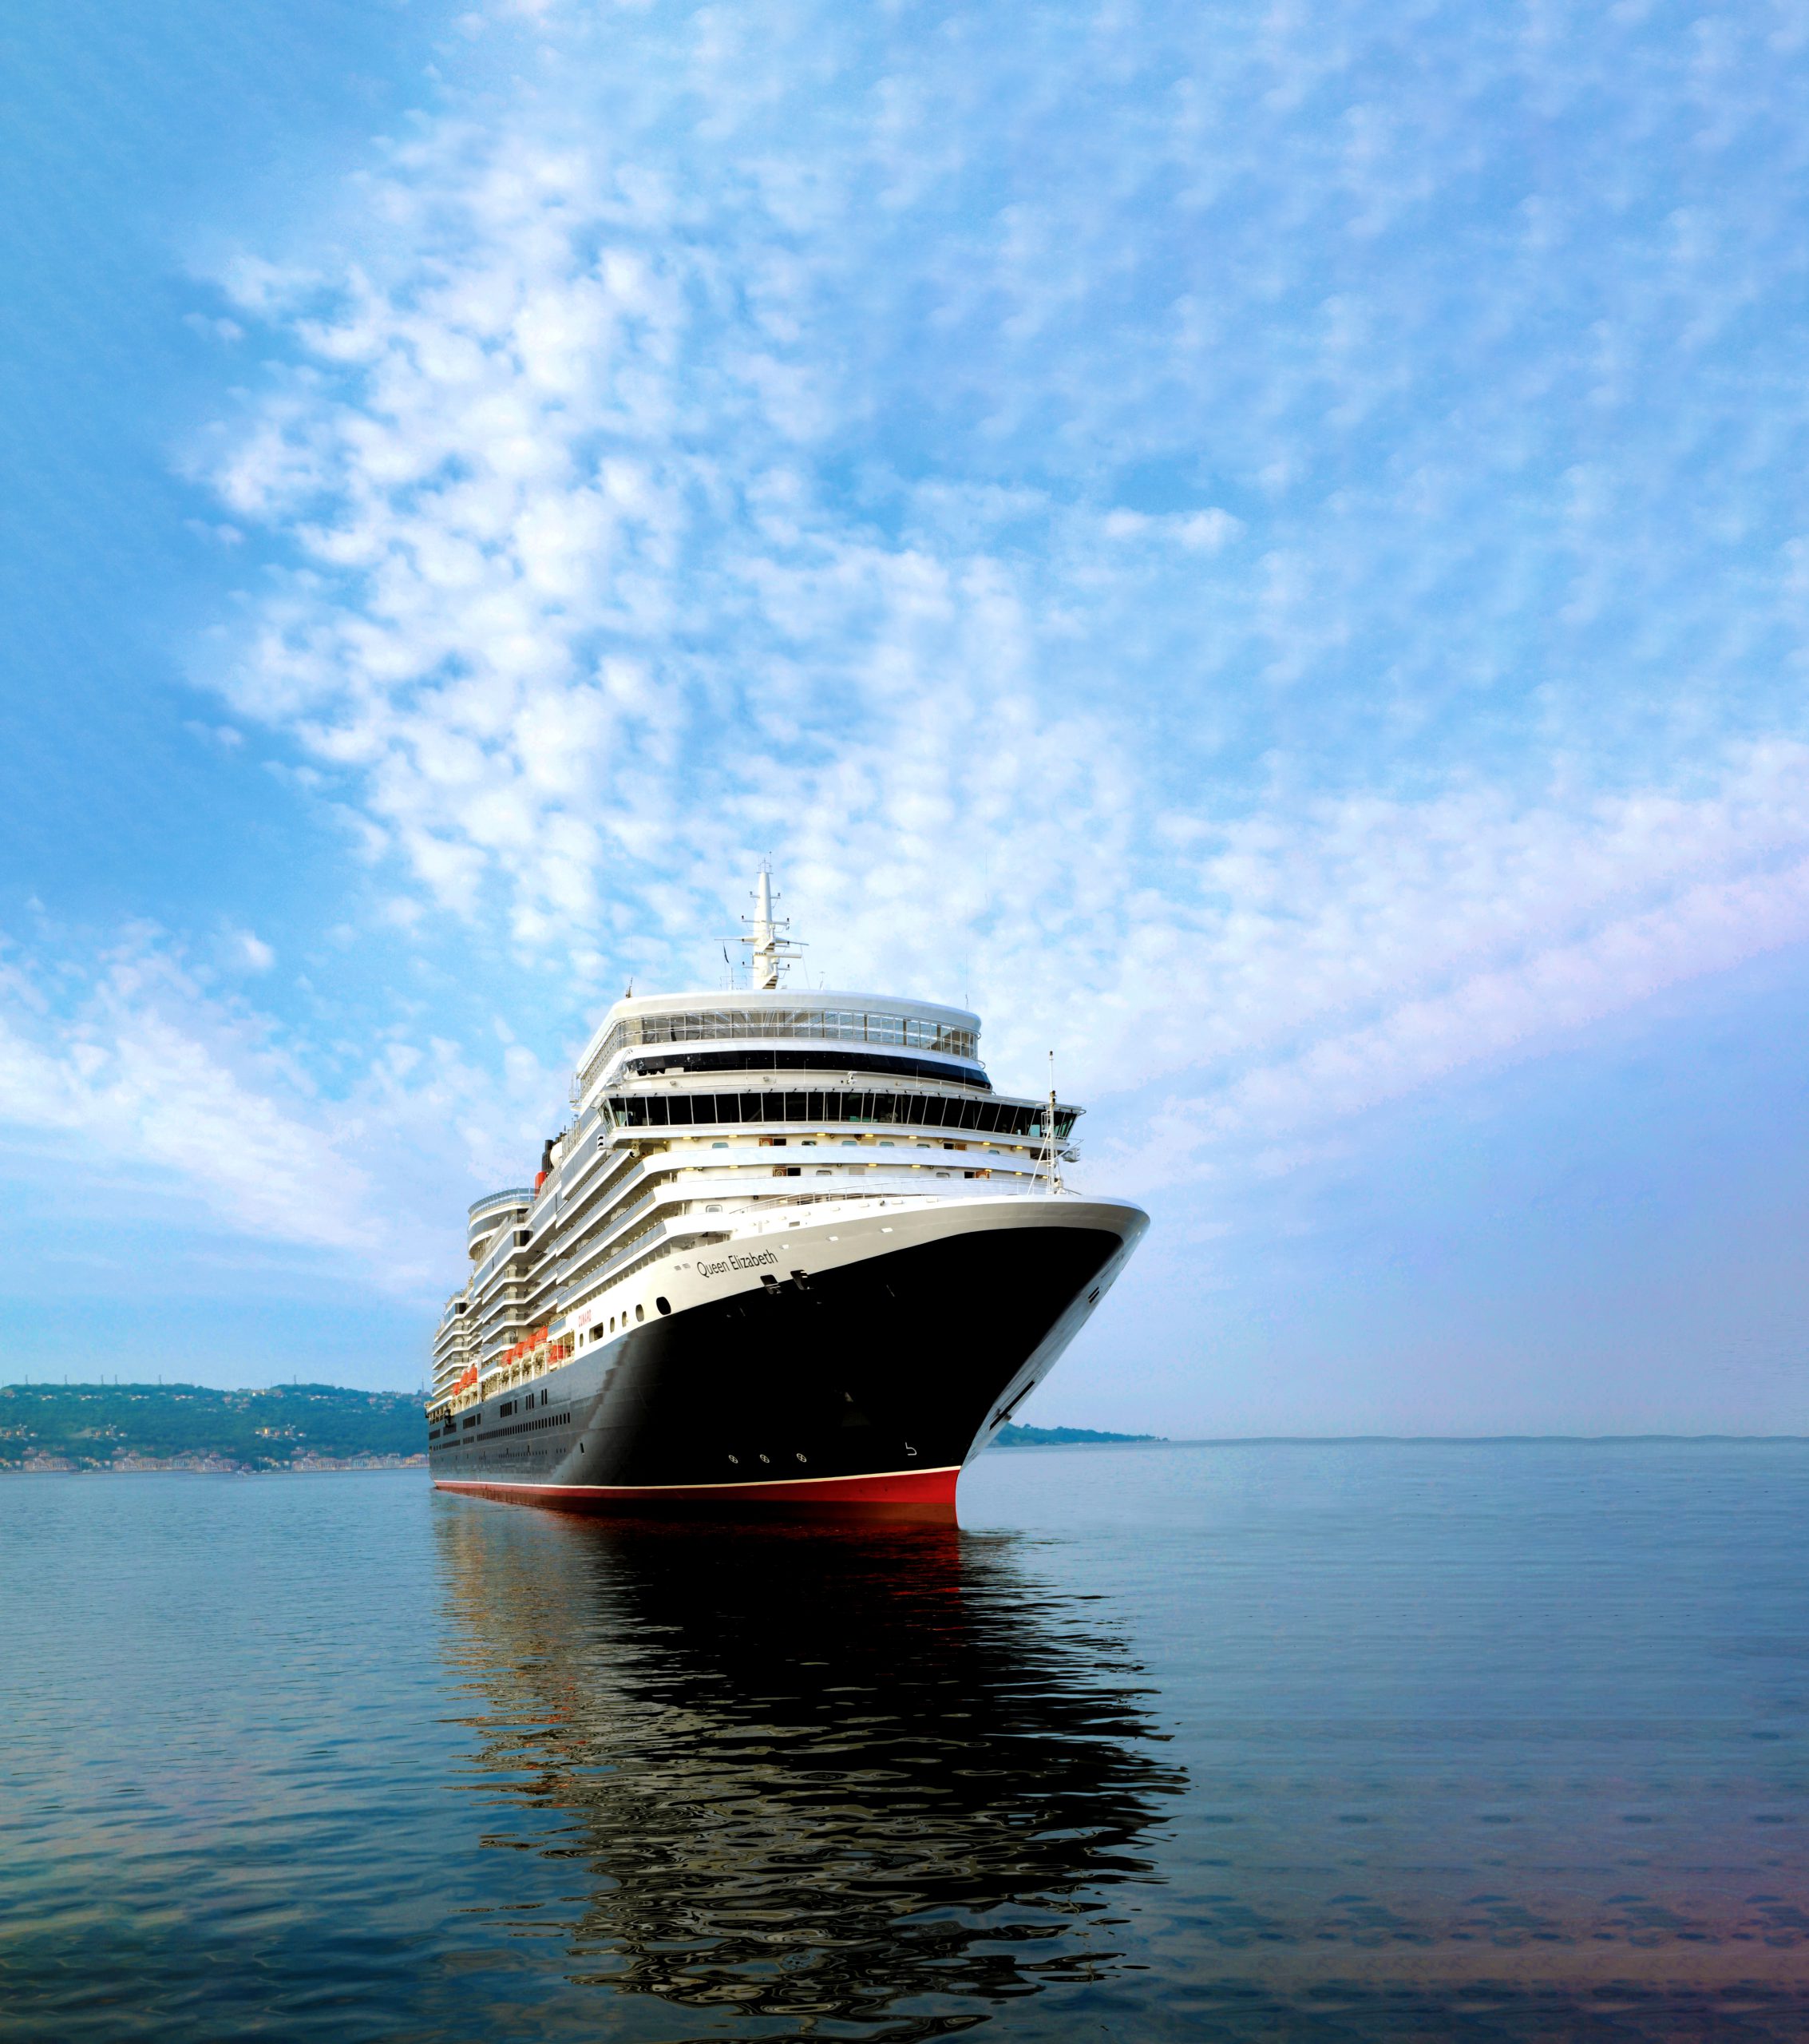 Flights, hotel stay and cruise on Queen Elizabeth from $2199 per person